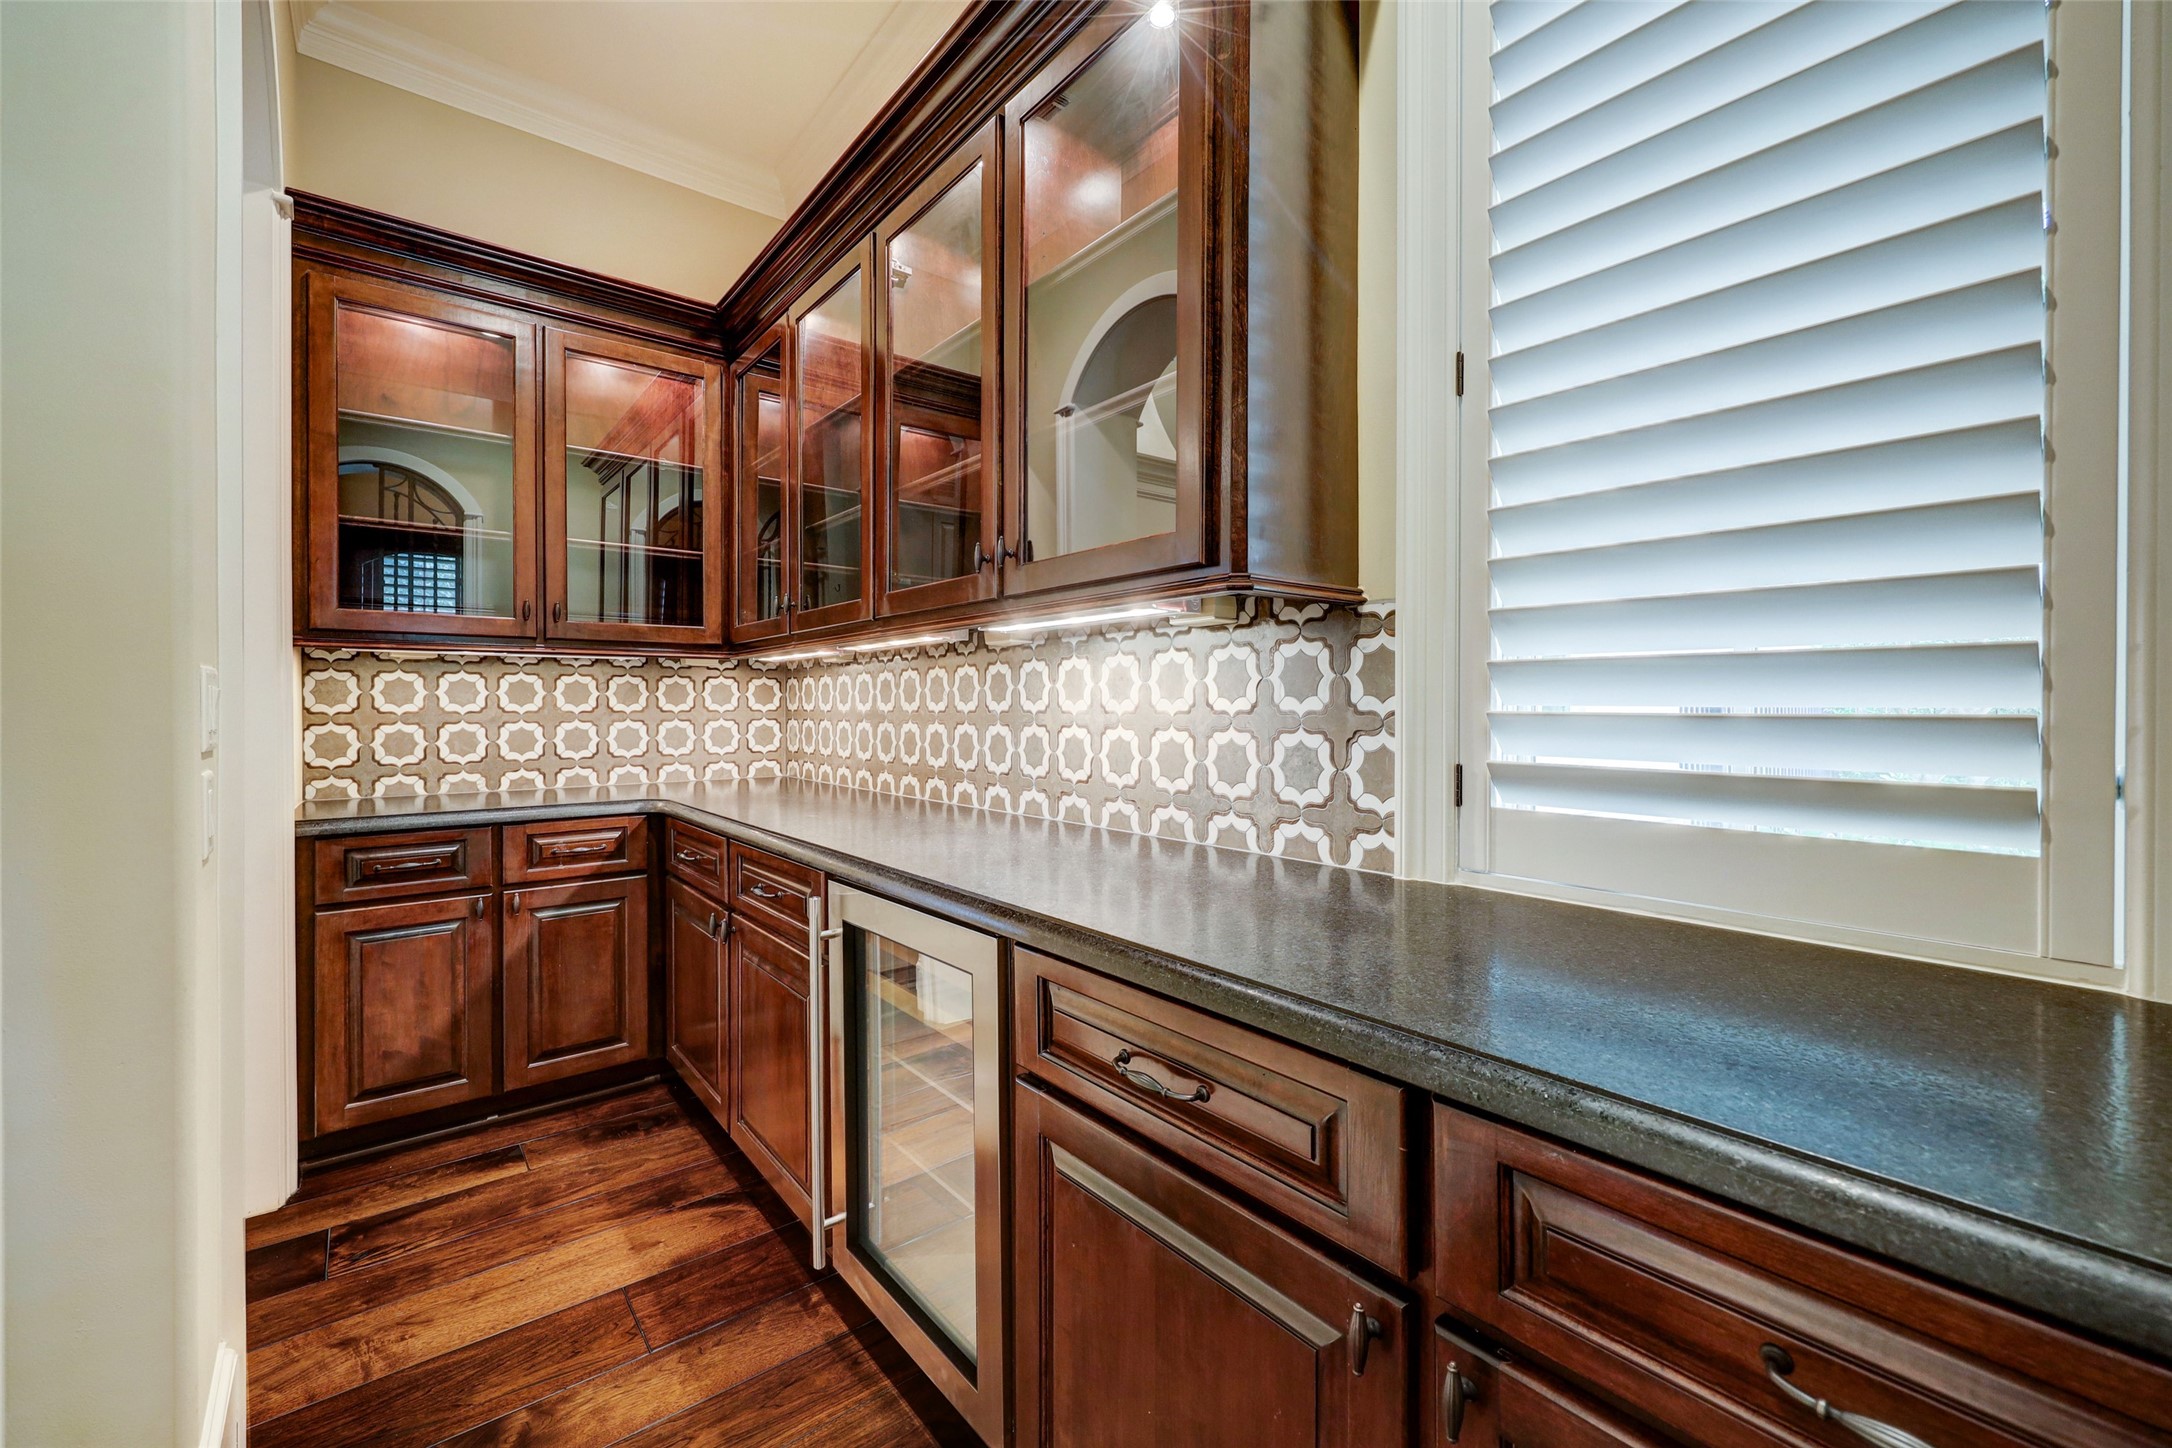 Your butler will love this Butler's Pantry! Above are lighted cabinets with glass shelves.  Below is a Beverage Chiller with drawers and cabinets.  In between is an updated backsplash.